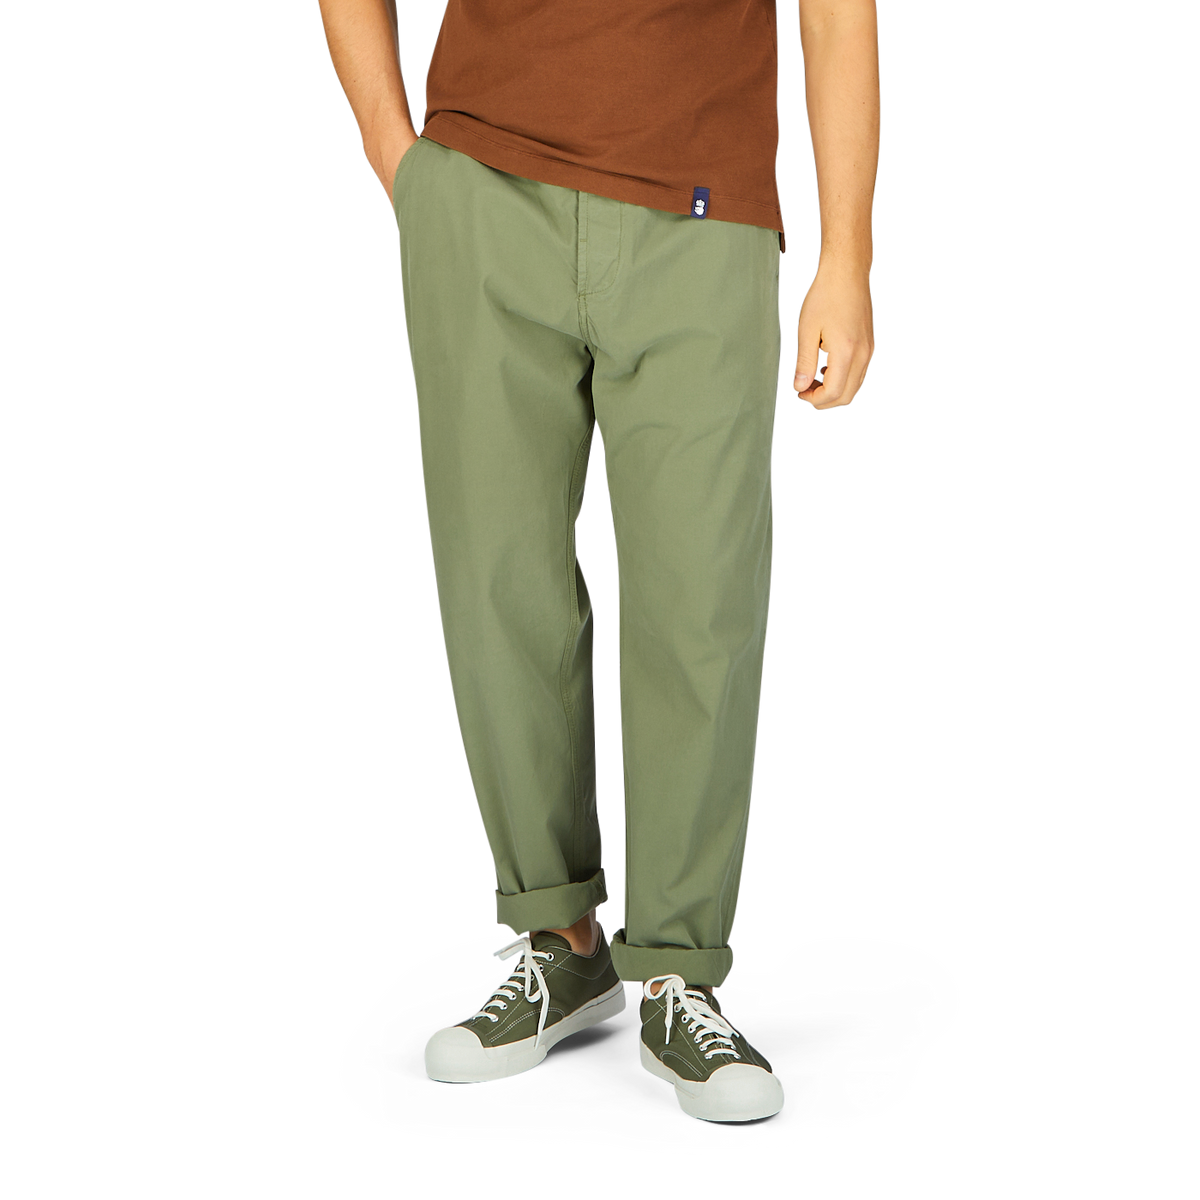 A person wearing Universal Works Birch Green Cotton Summer Canvas Military Chinos and white sneakers stands against a plain background.